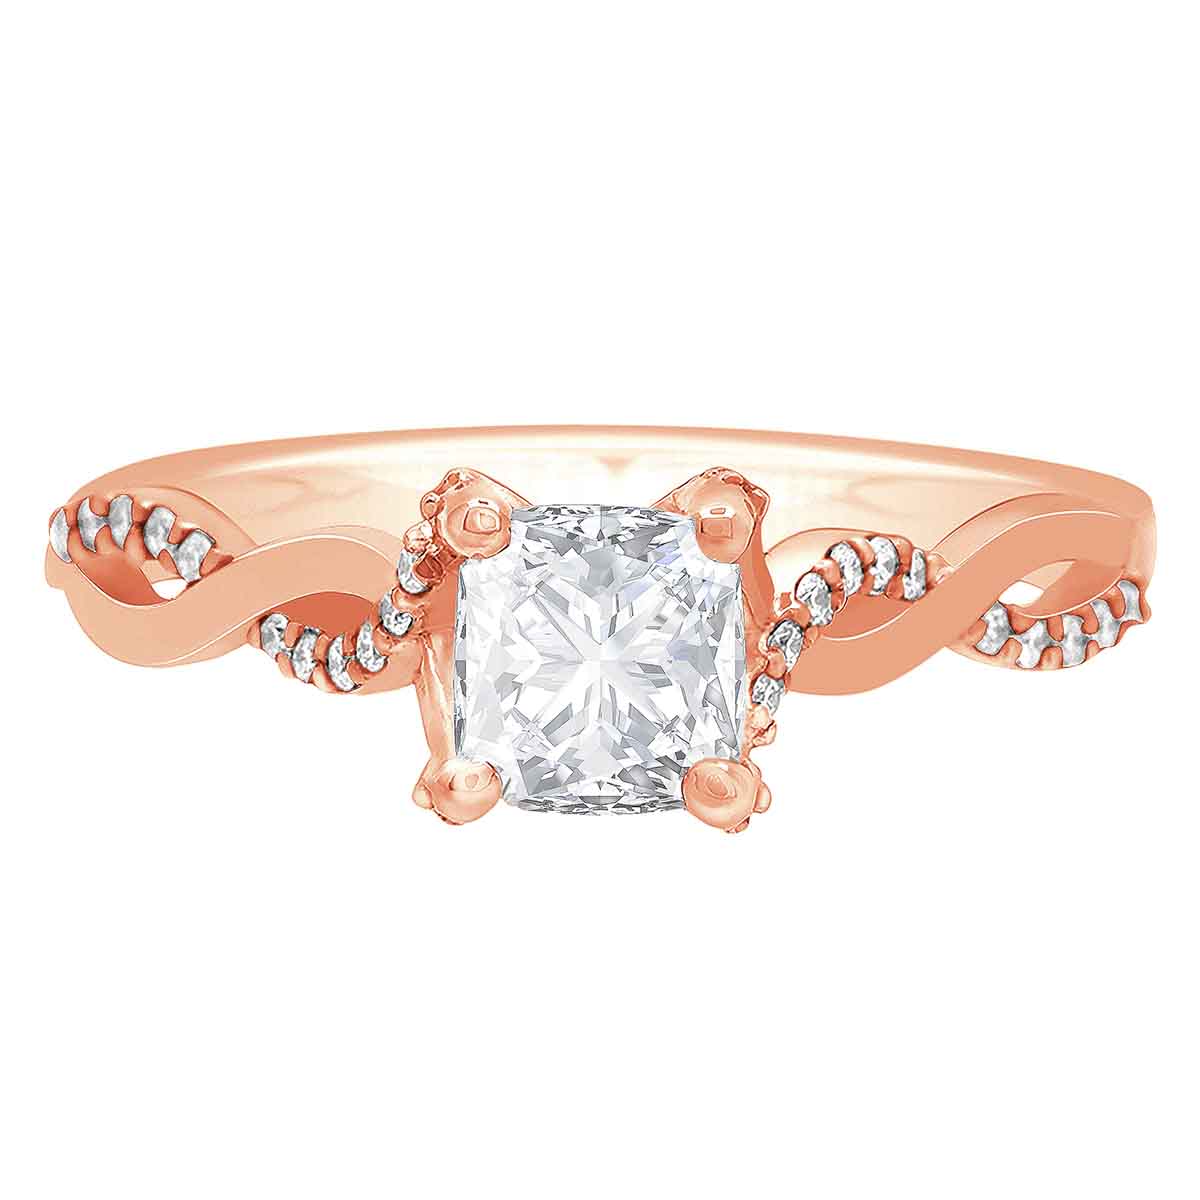 Engagement Ring With Twisted band made in rose gold